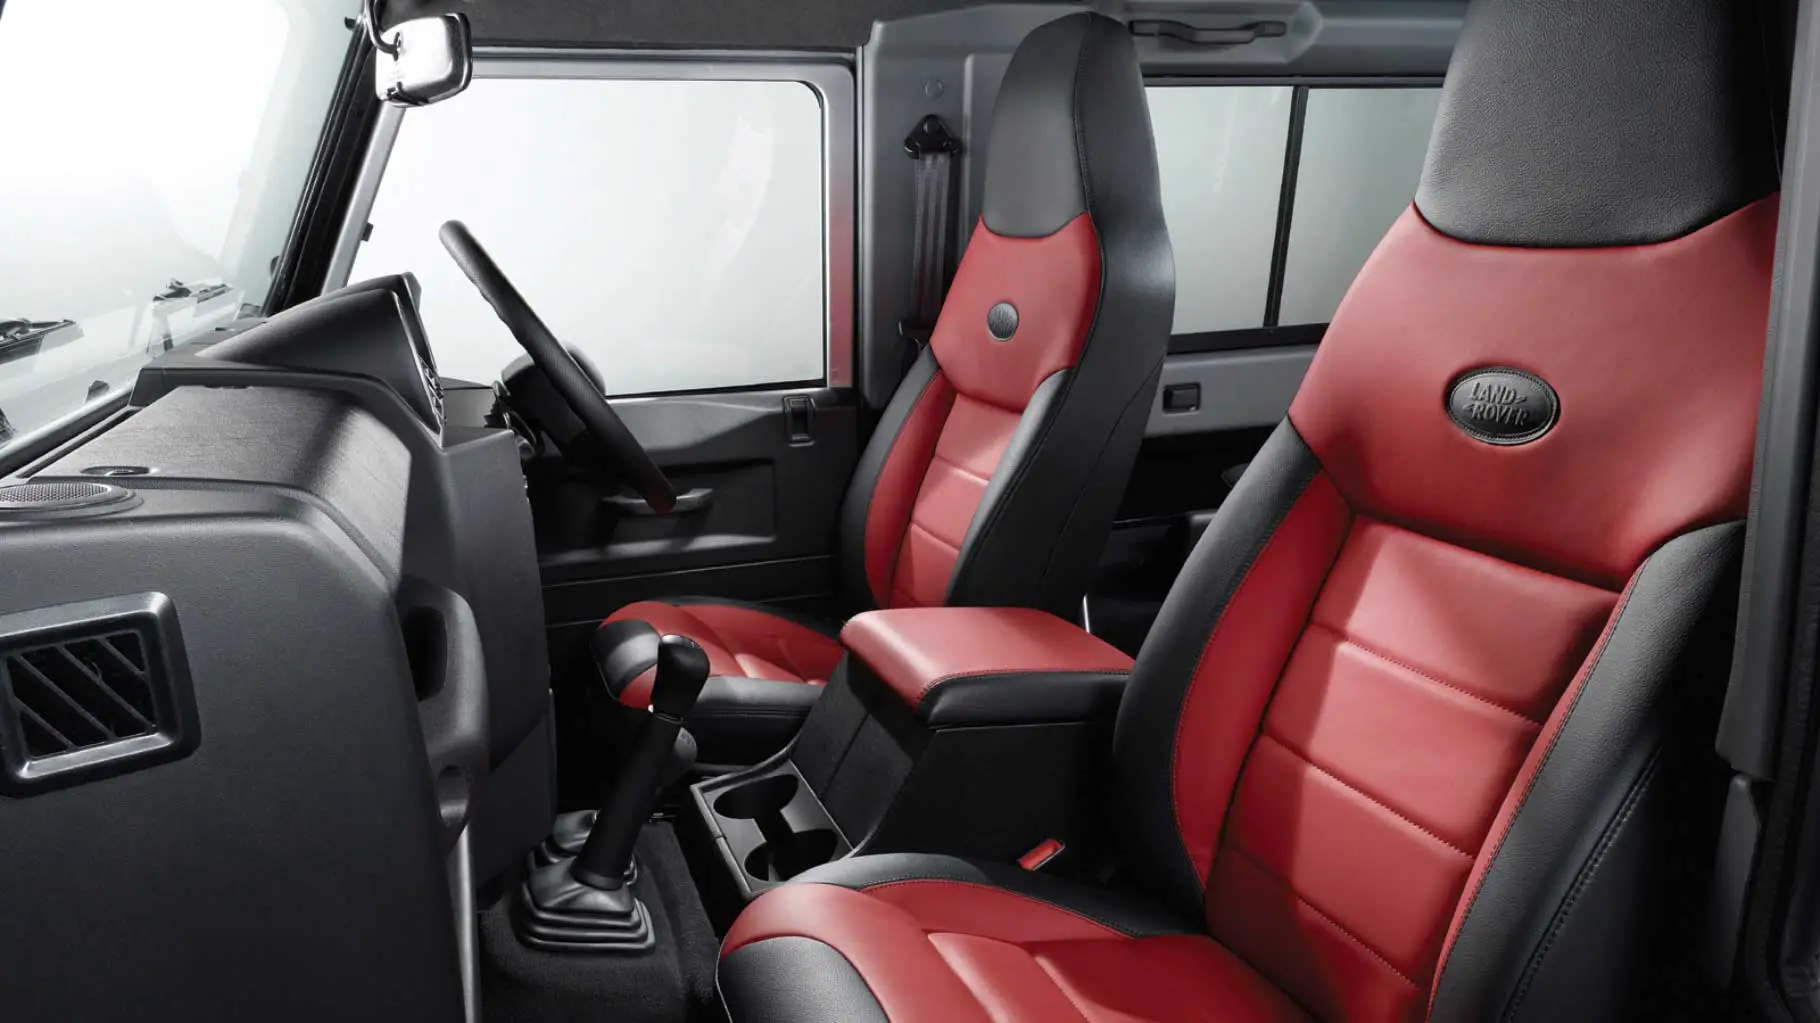 Land Rover Defender 130 Interior Image Gallery, Pictures, Photos